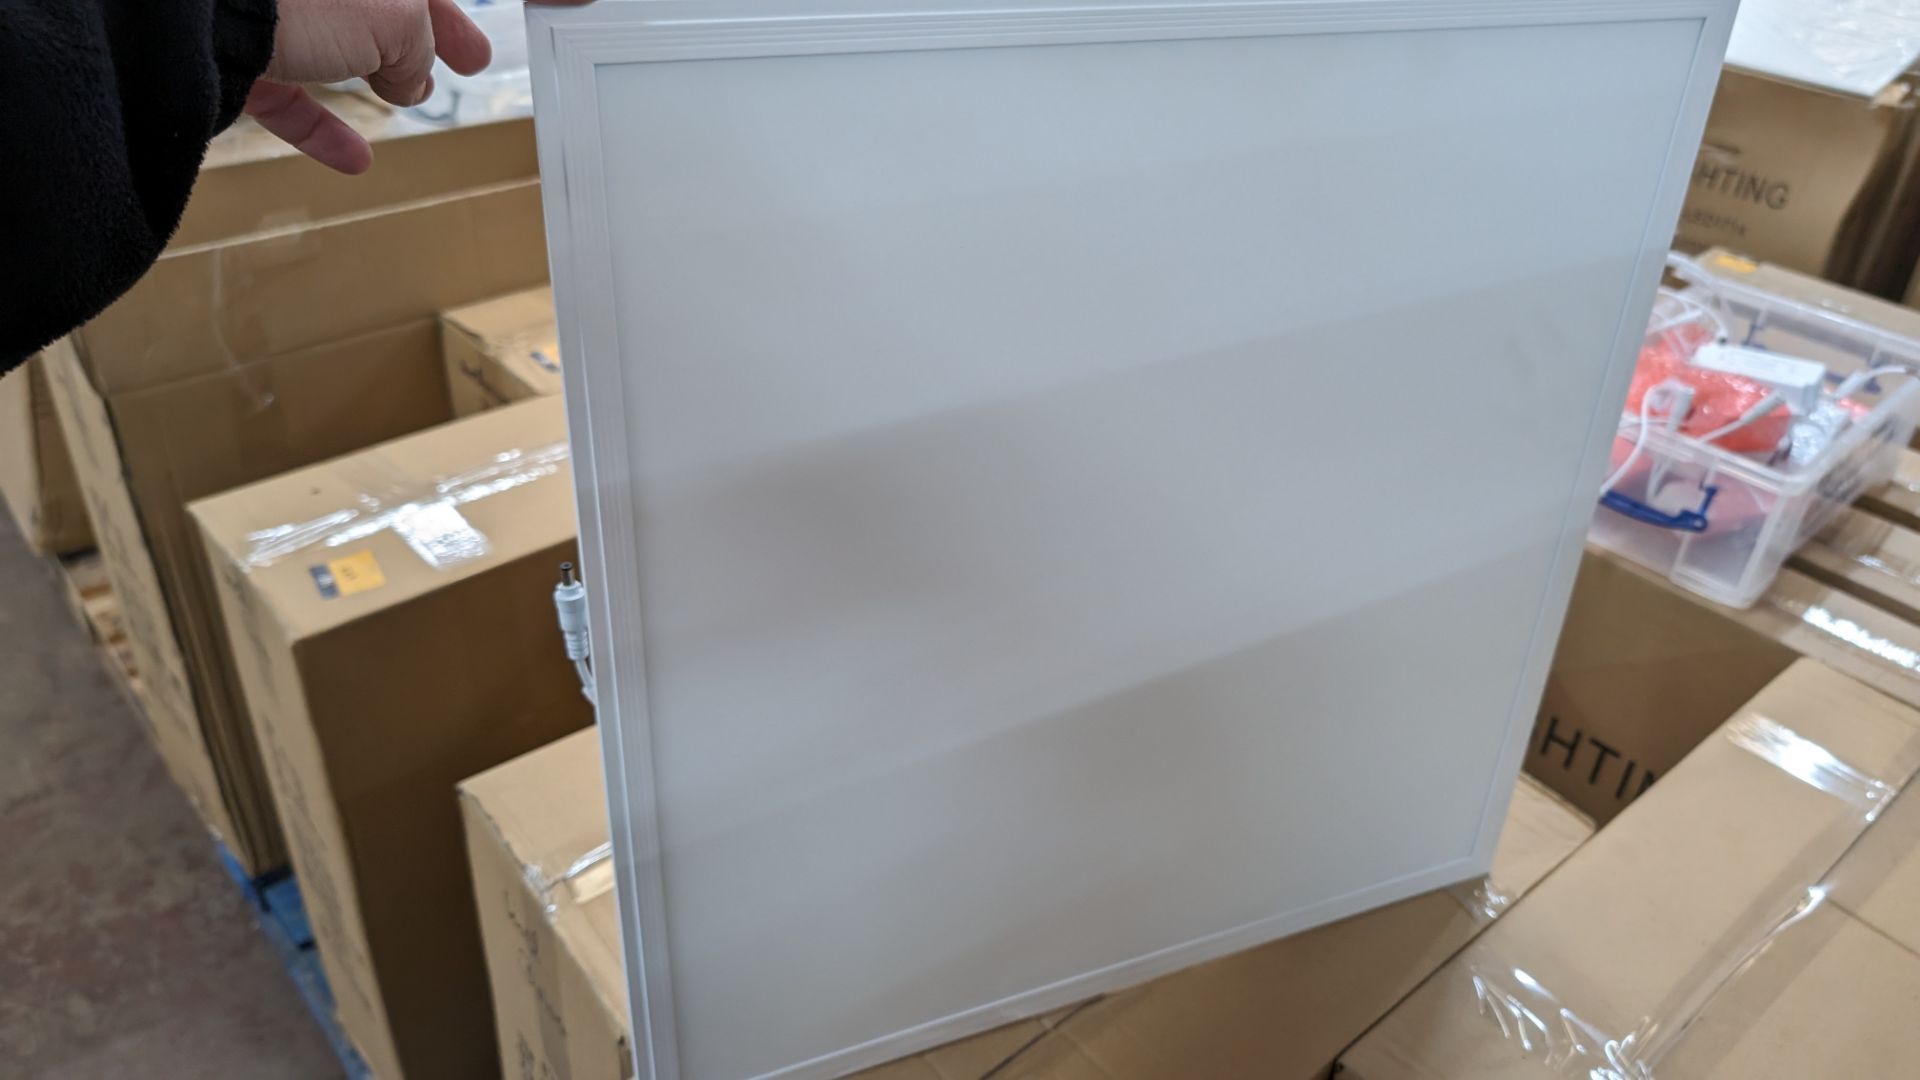 8 off 595mm x 595mm 4000k 45w LED lighting panels, each including driver - 1 carton - Image 3 of 4